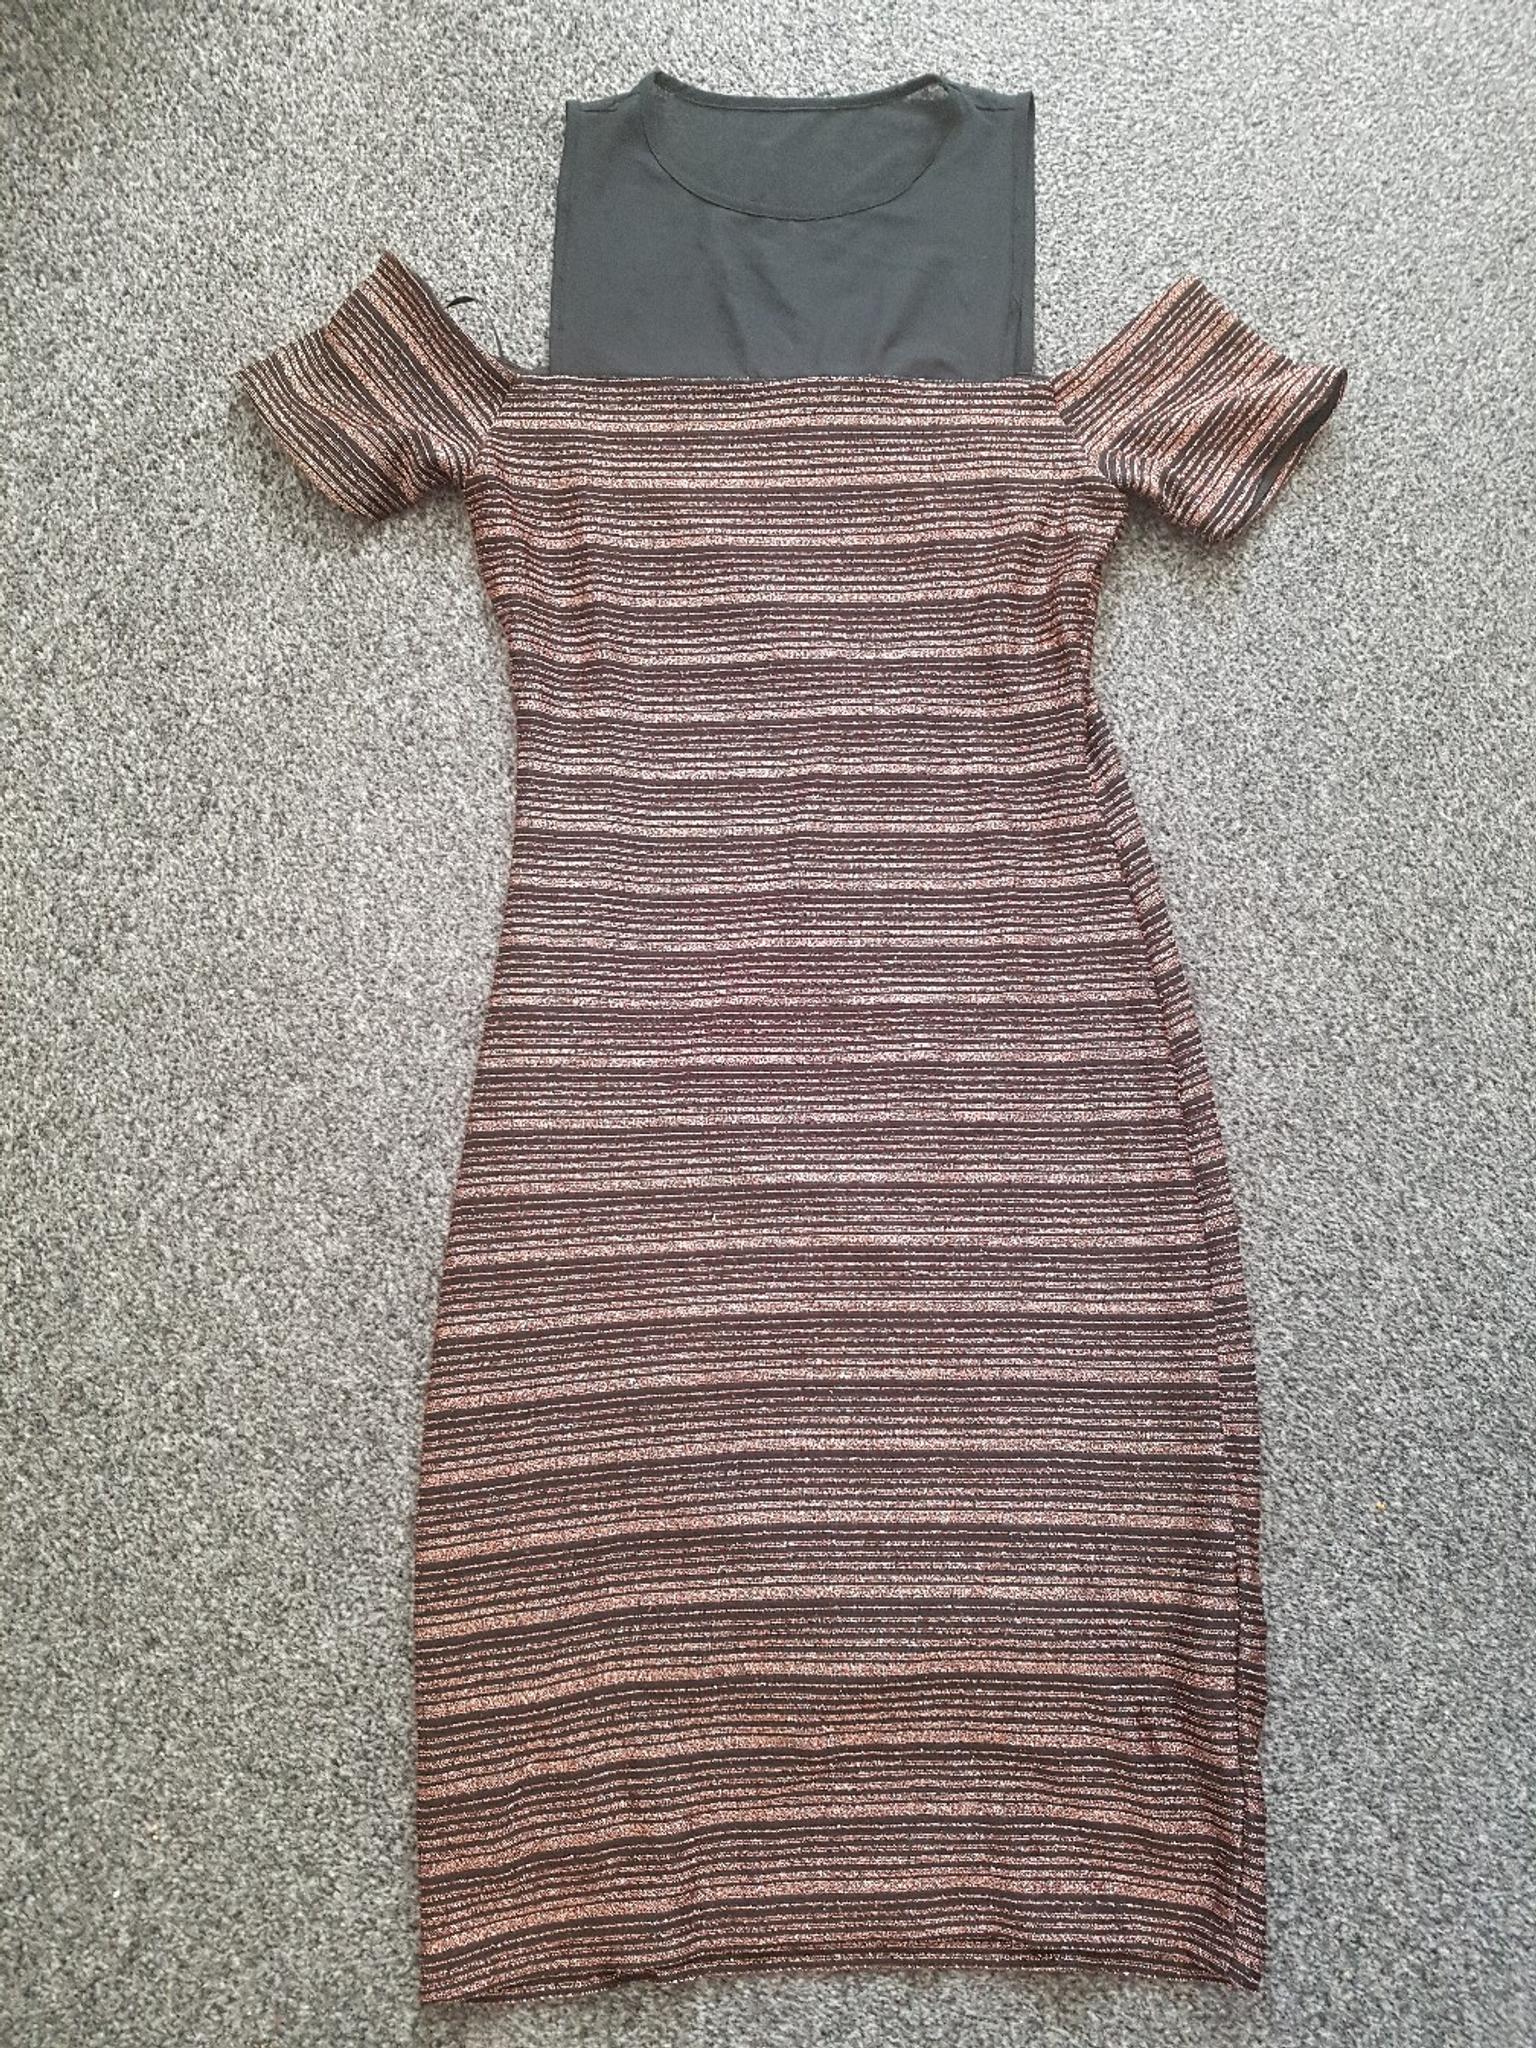 new look rose gold dress